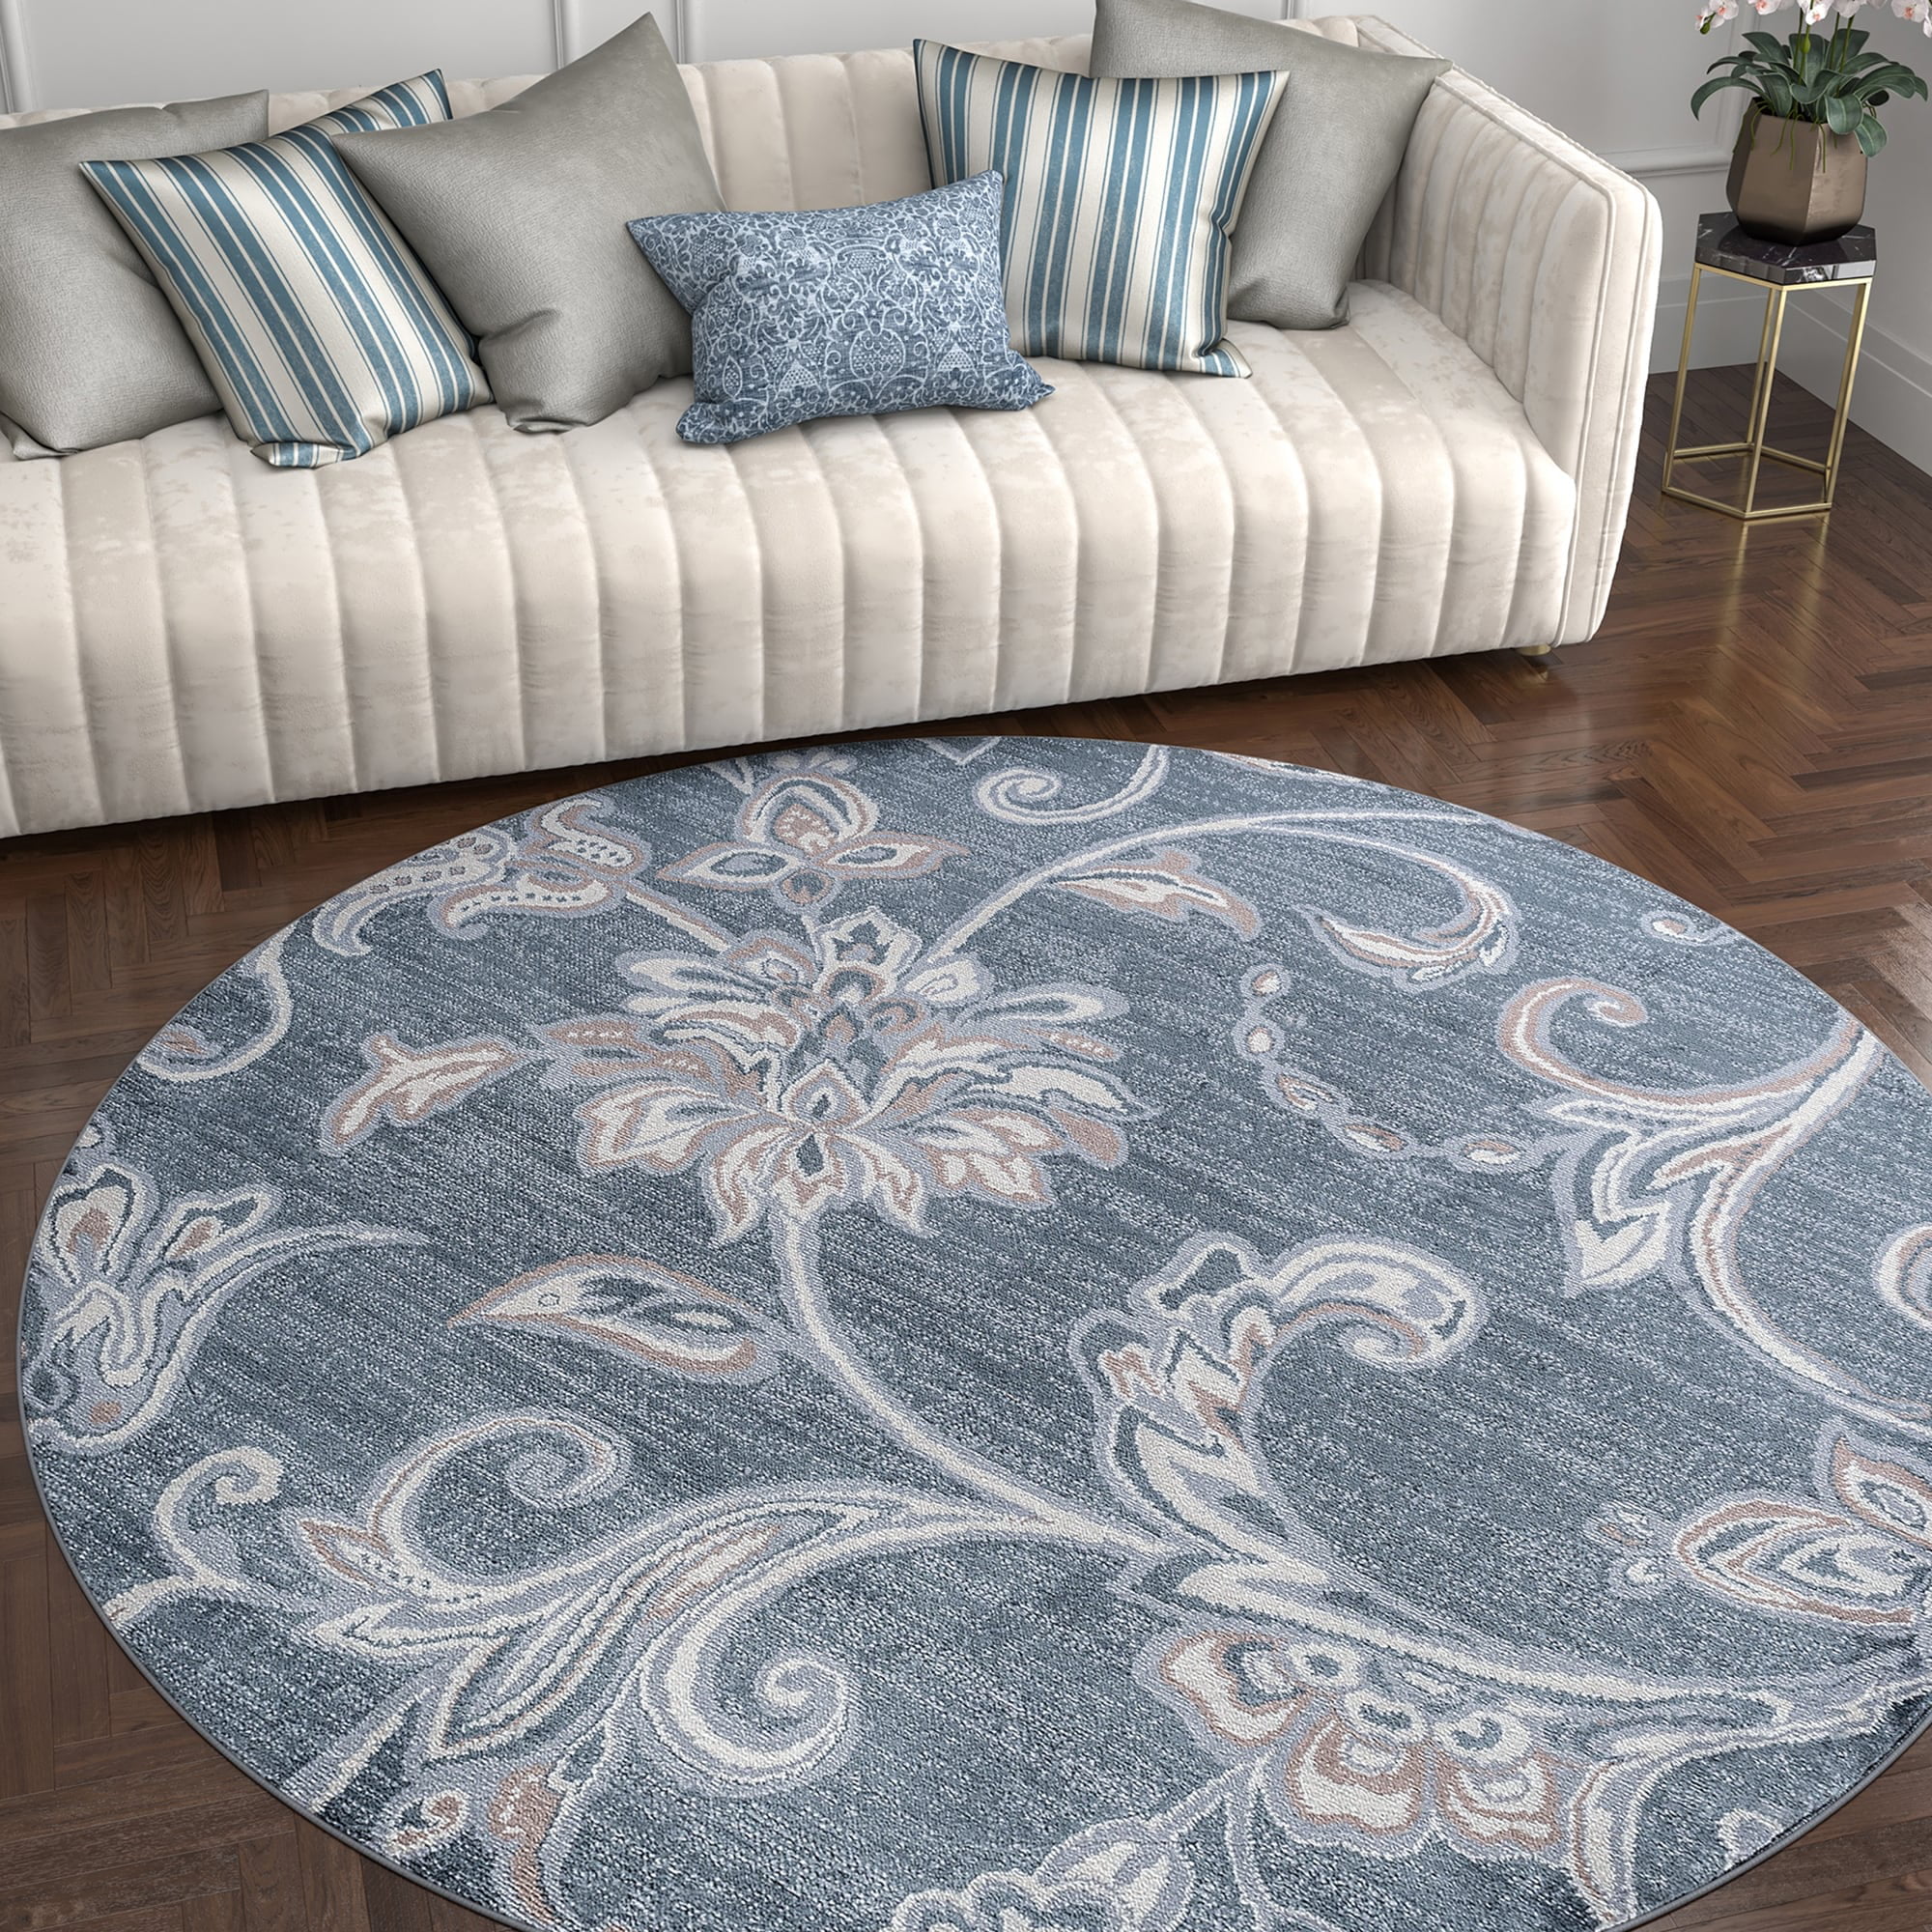 Alise Rugs Carrington Transitional Floral Area Rug Grey 7'6 x 9'10 Floral & Botanical 8' x 10' Indoor Living Room Dining Room Cream Bedroom